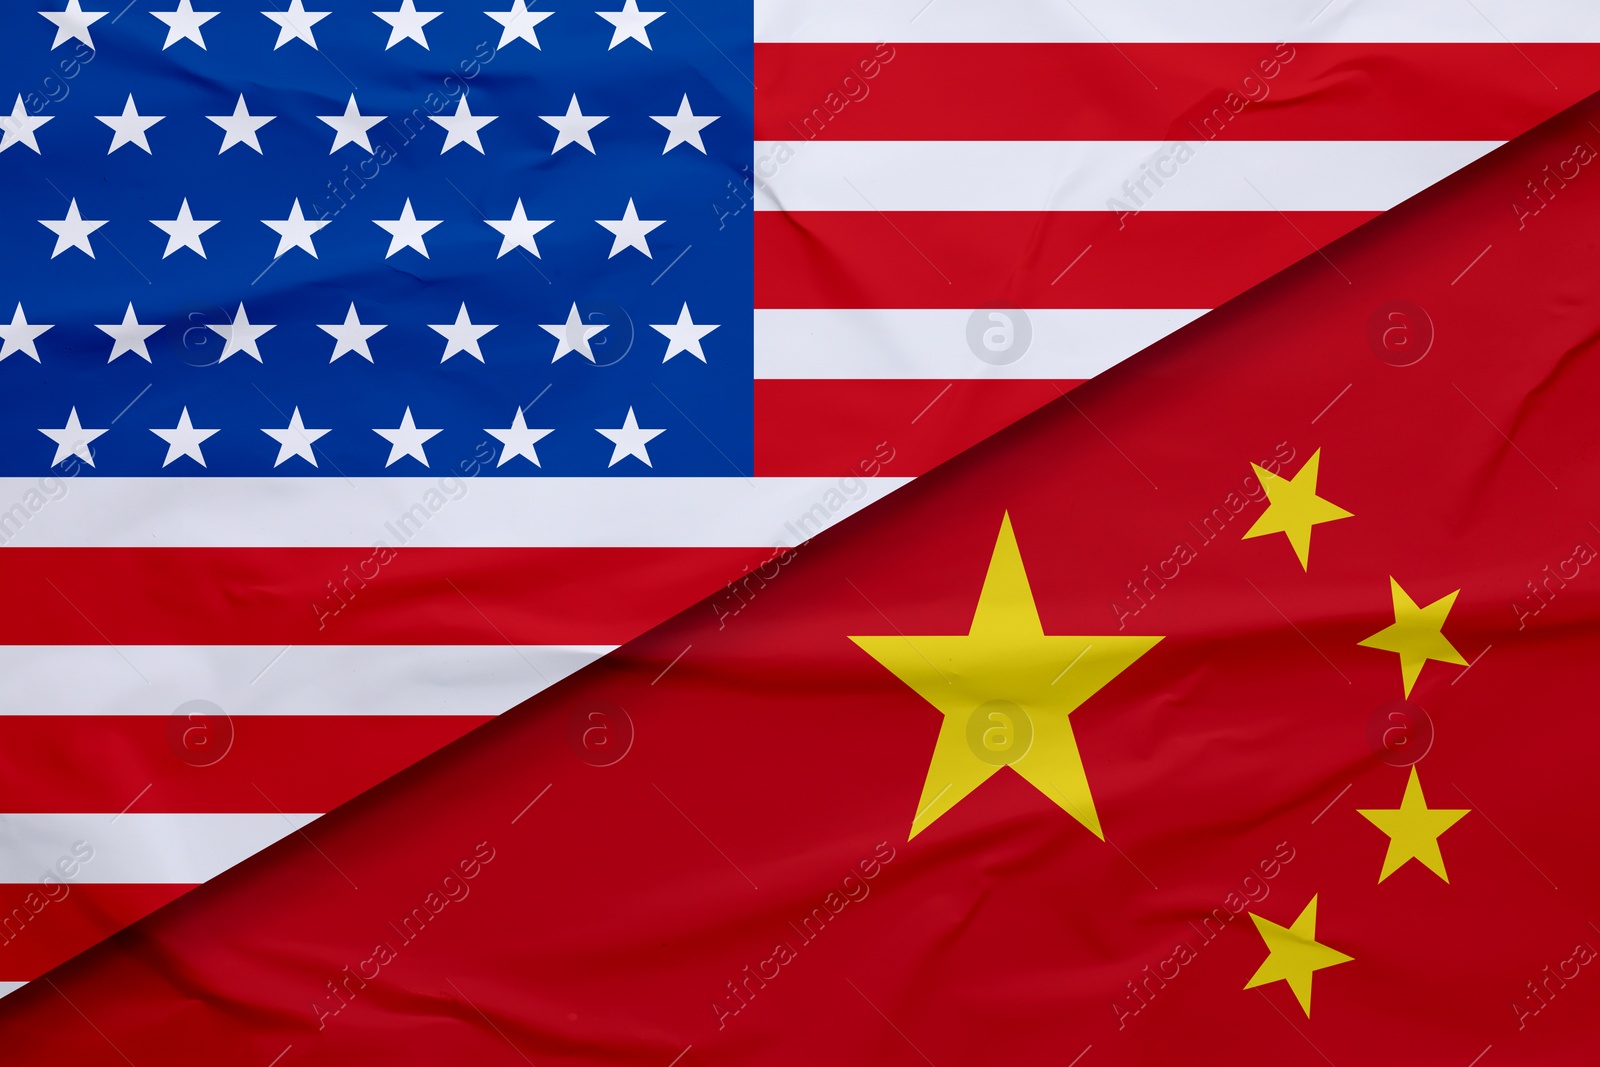 Image of Flags of USA and China. International diplomatic relationships